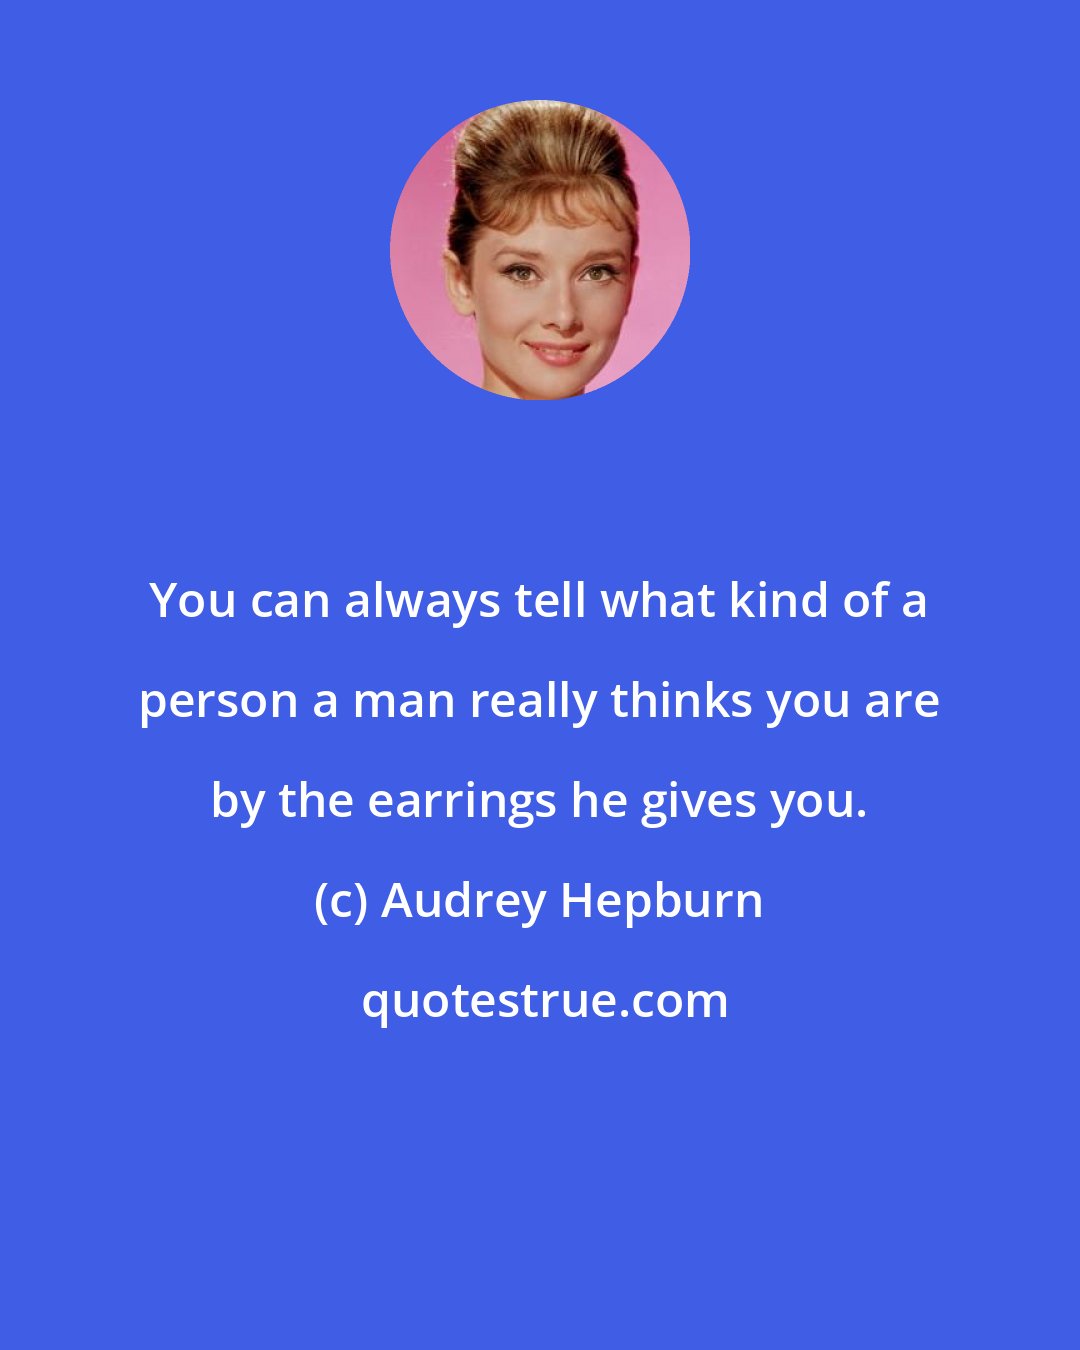 Audrey Hepburn: You can always tell what kind of a person a man really thinks you are by the earrings he gives you.